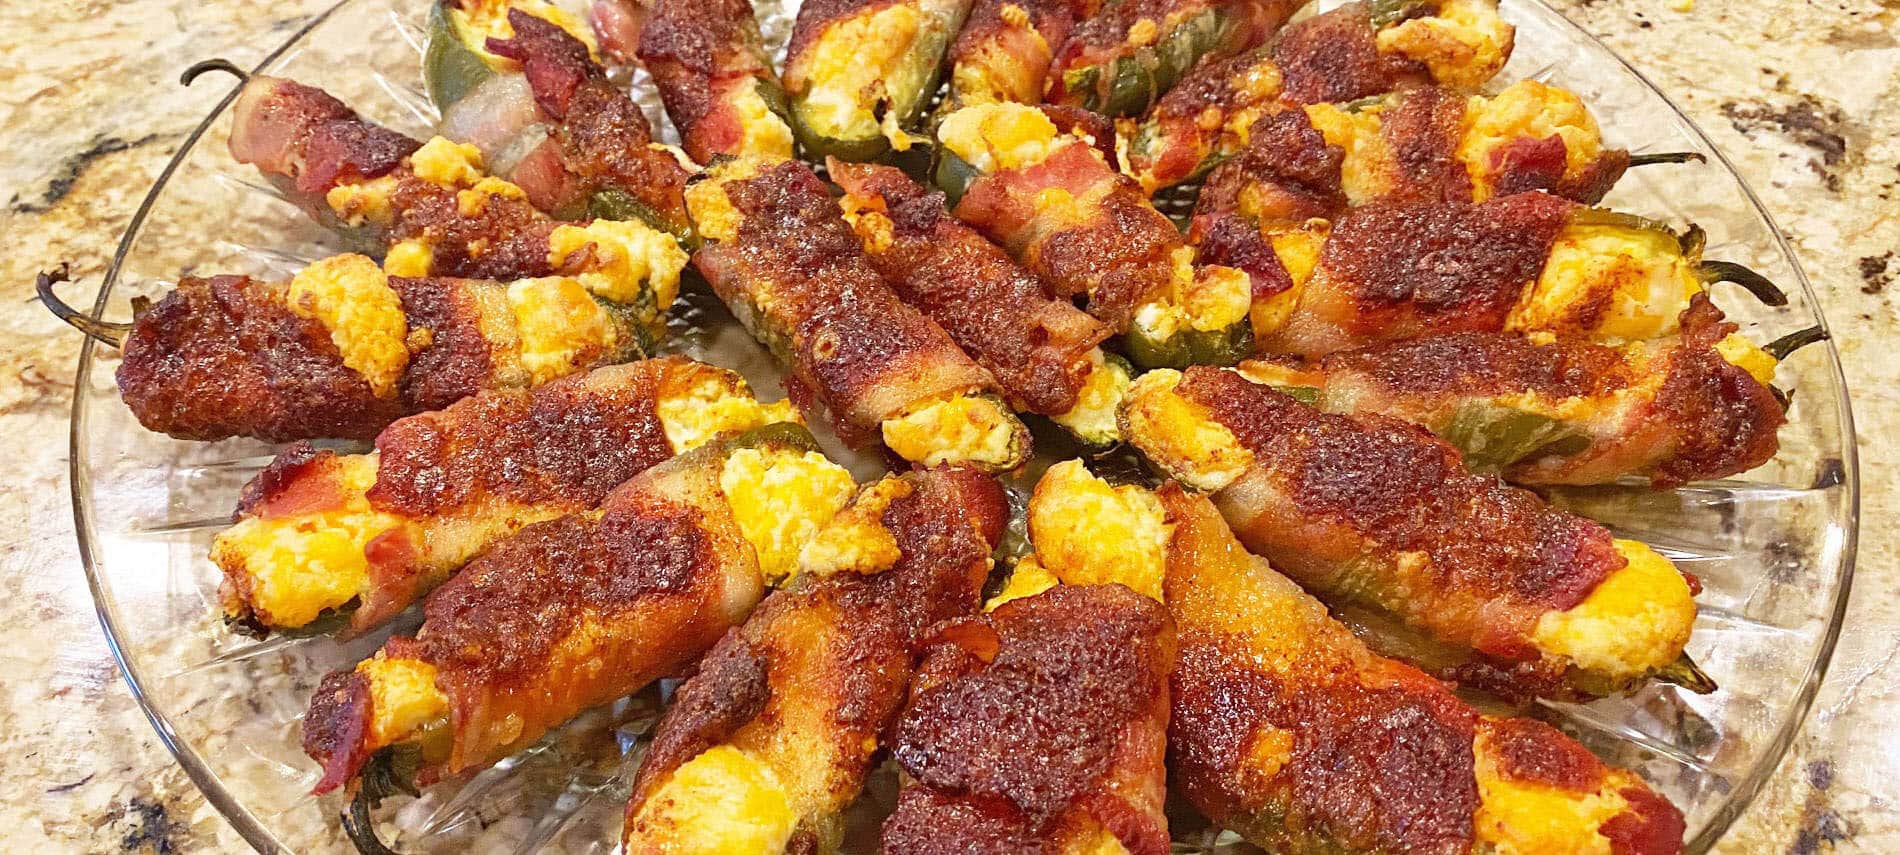 Bacon Wrapped Jalapeno Peppers filled with cheese and sprinkled with brown sugar and chili powder